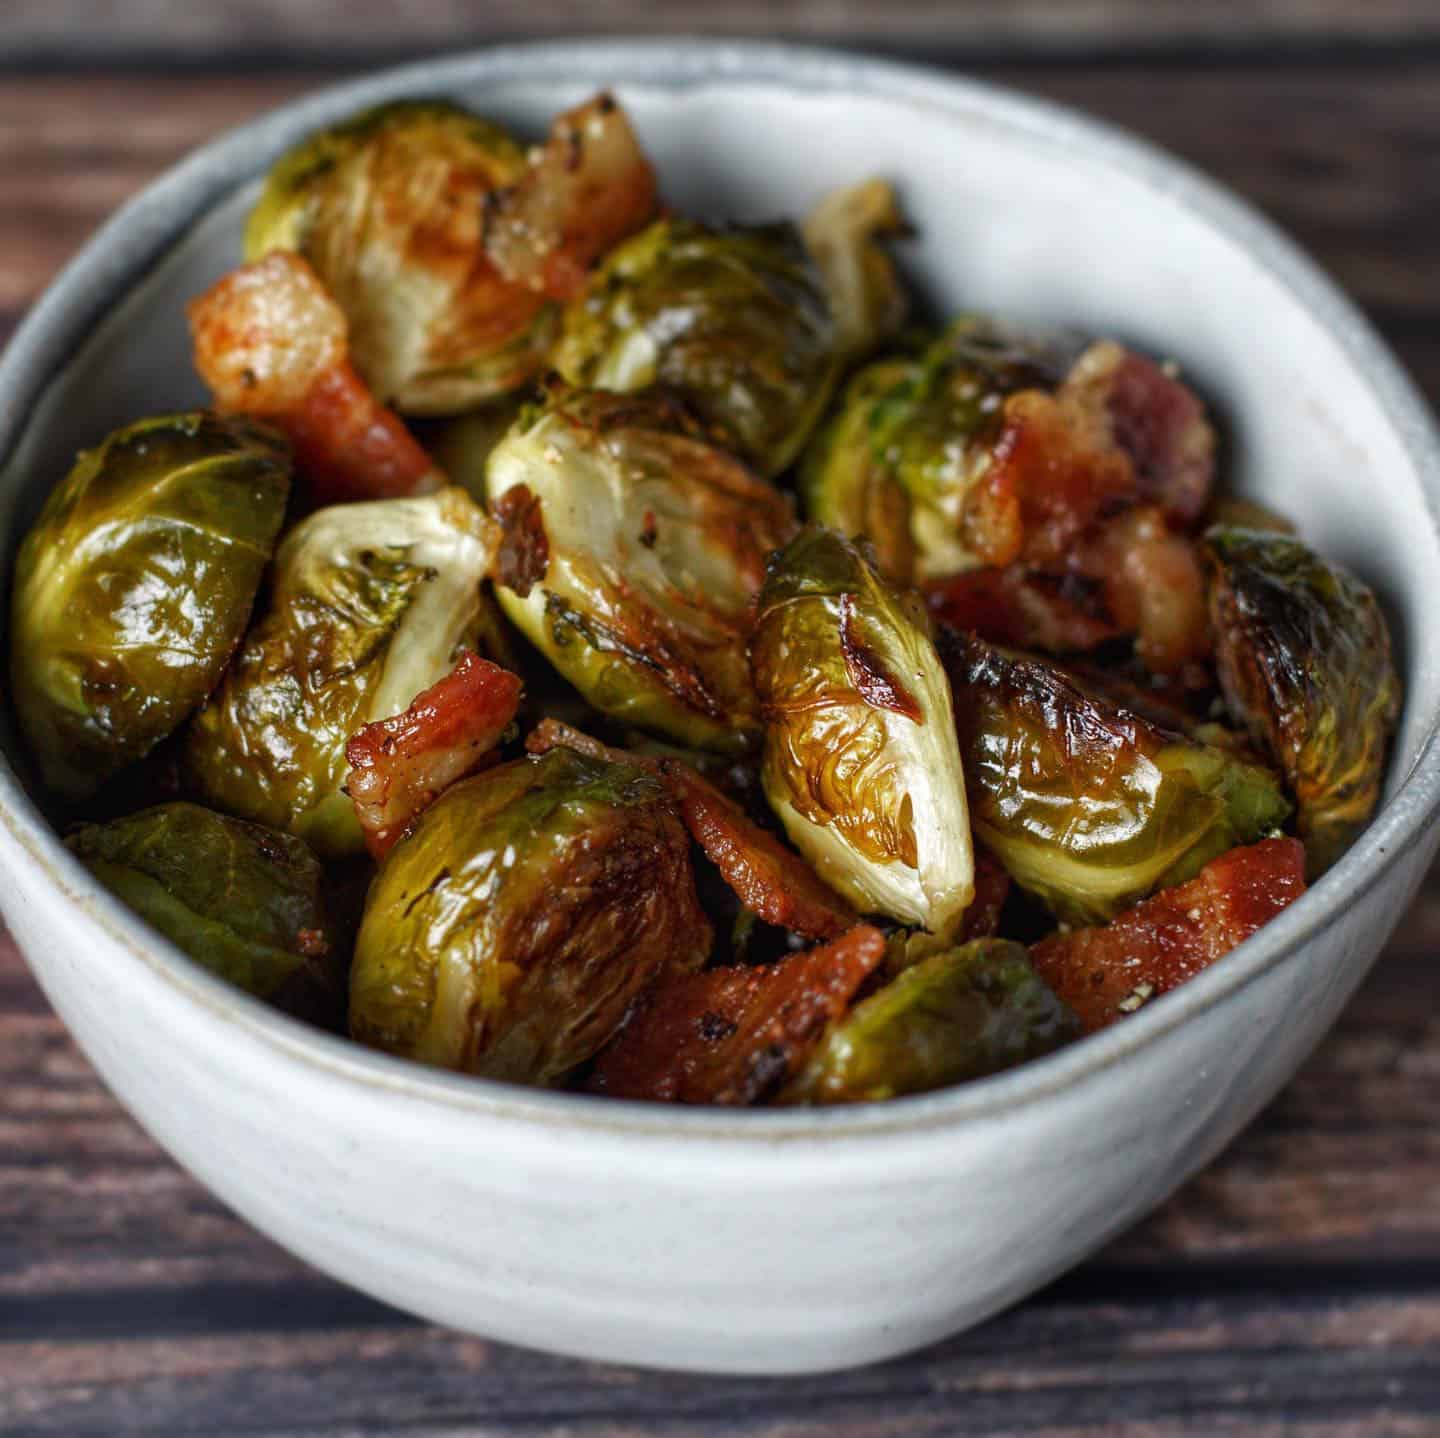 Roasted Brussels sprouts with bacon served in a small bowl.